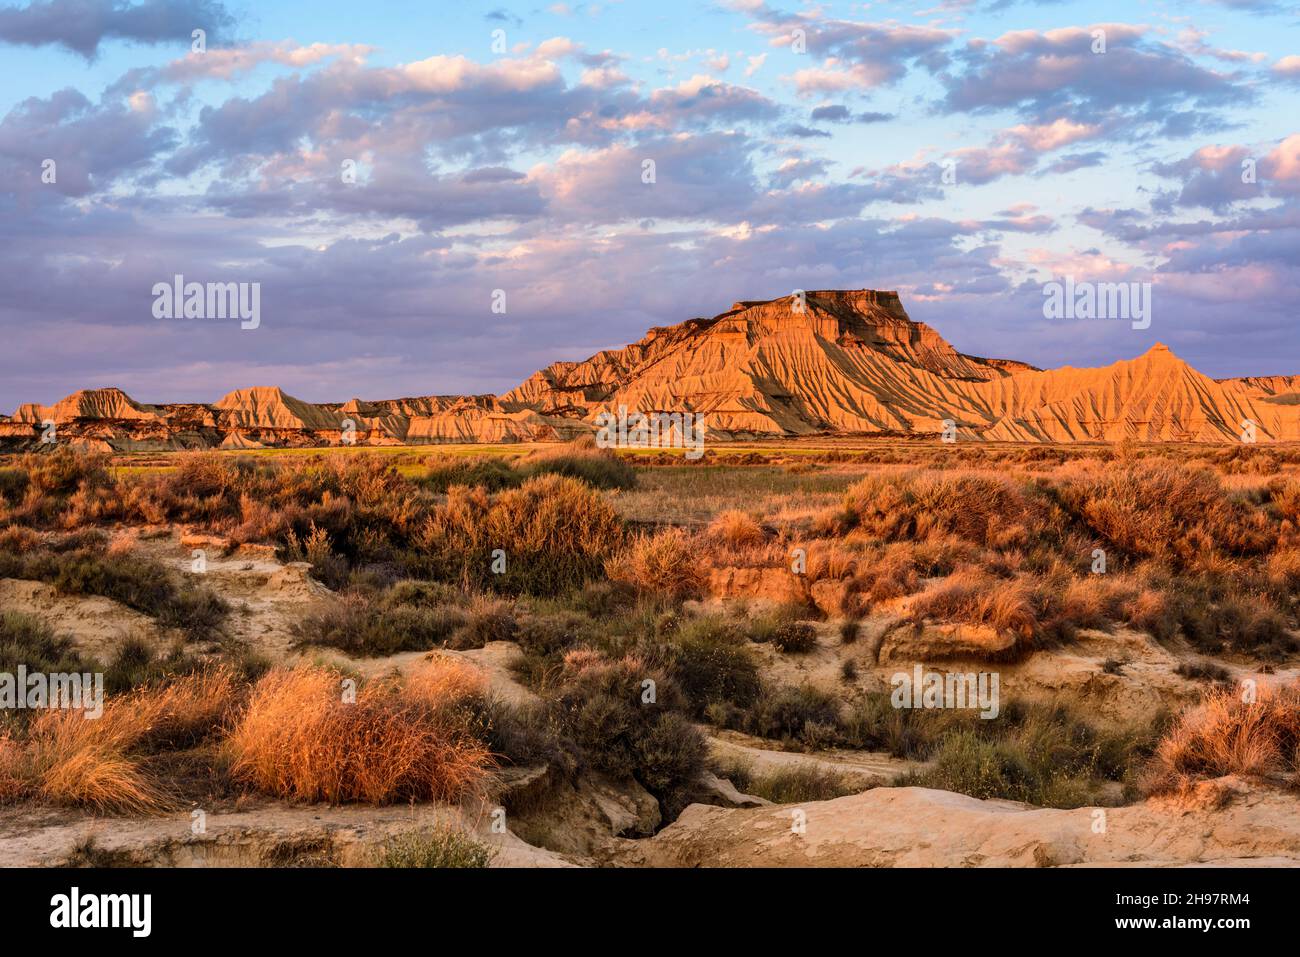 Red glowing mountain range against cloudy sky - Banderas Reales, Arguedas, Spain Stock Photo